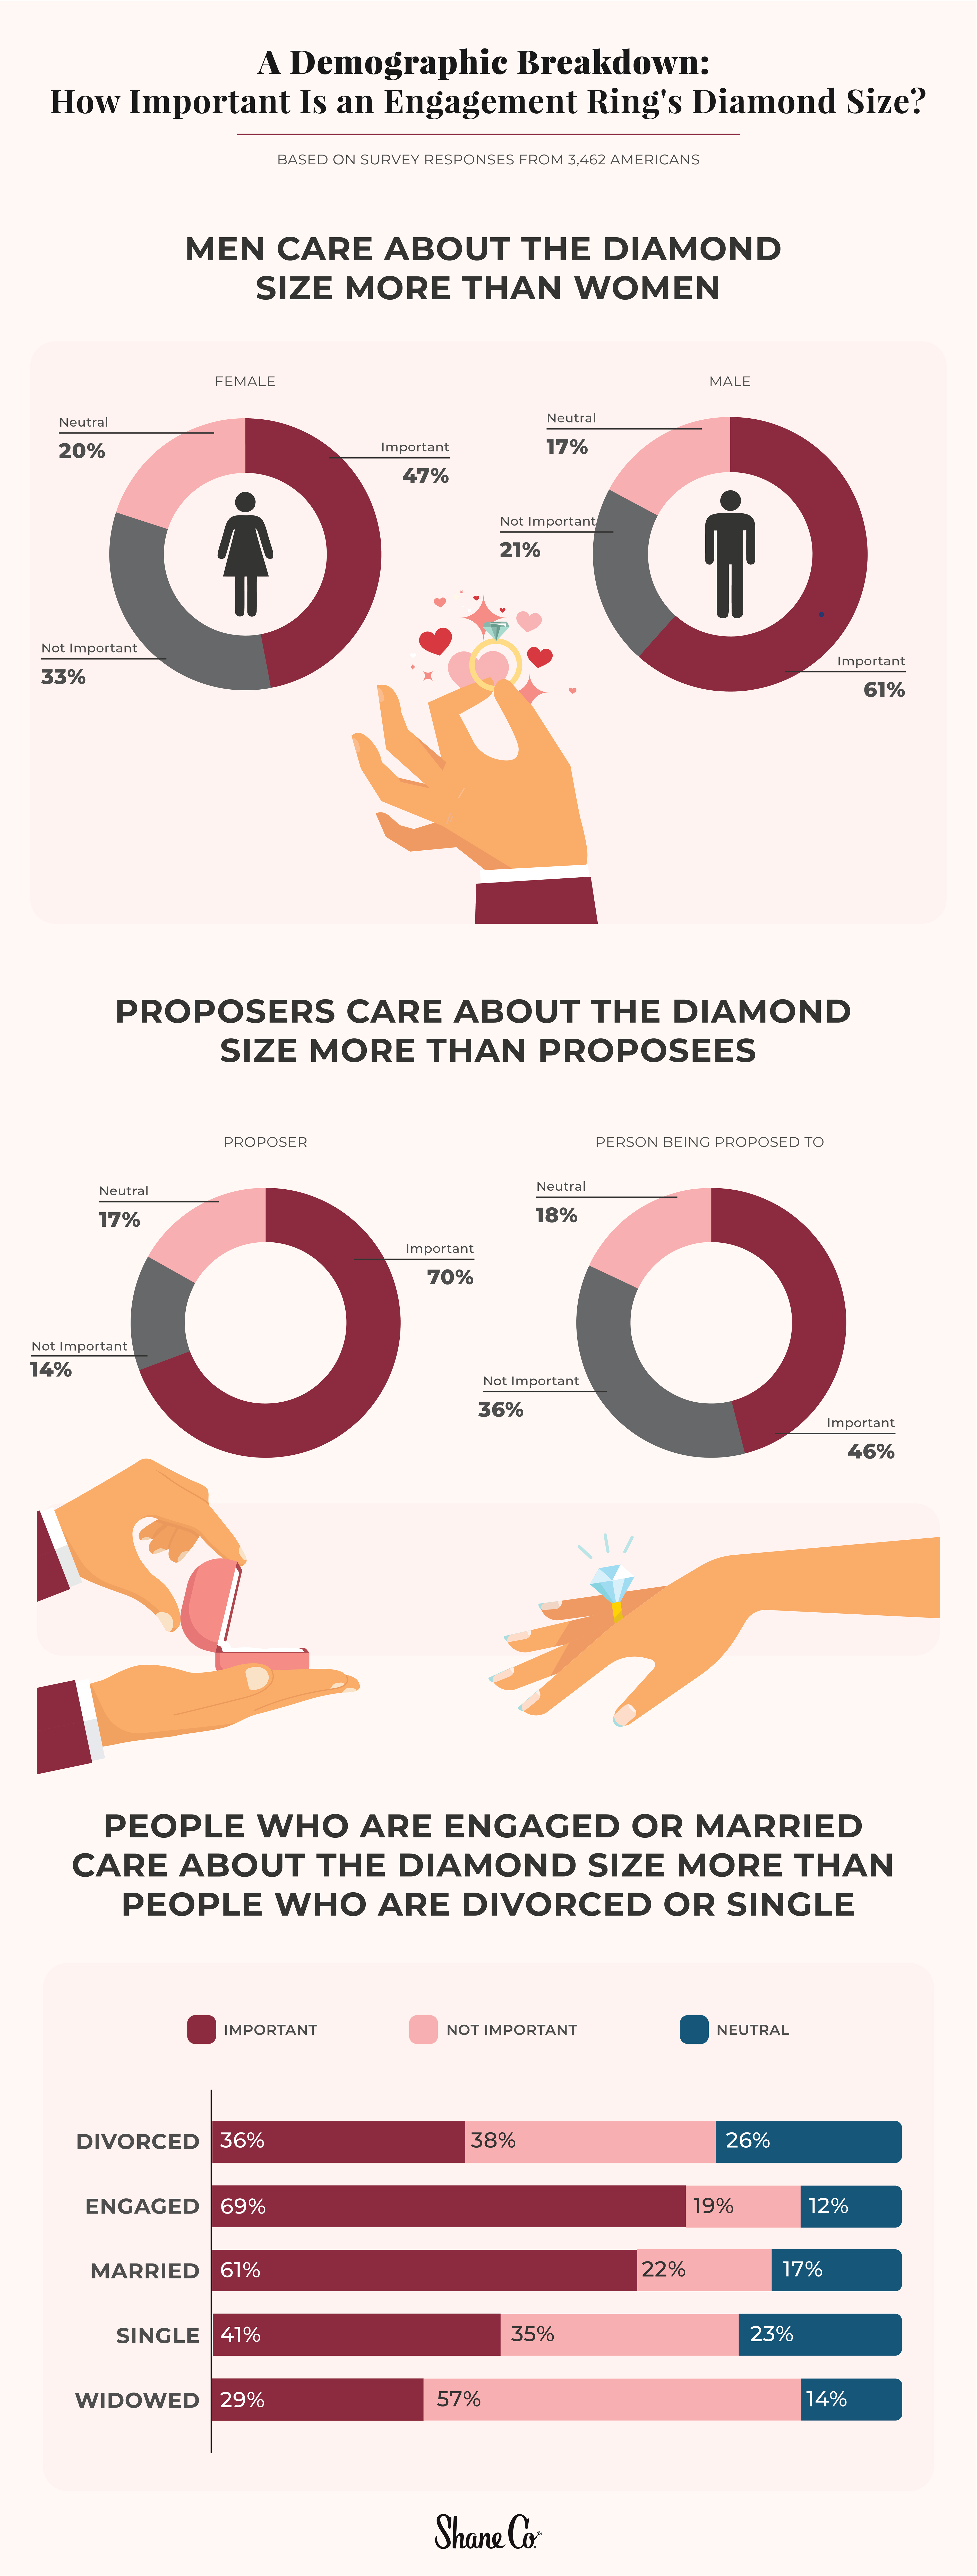 Data about what type of individual cares the most about diamond size